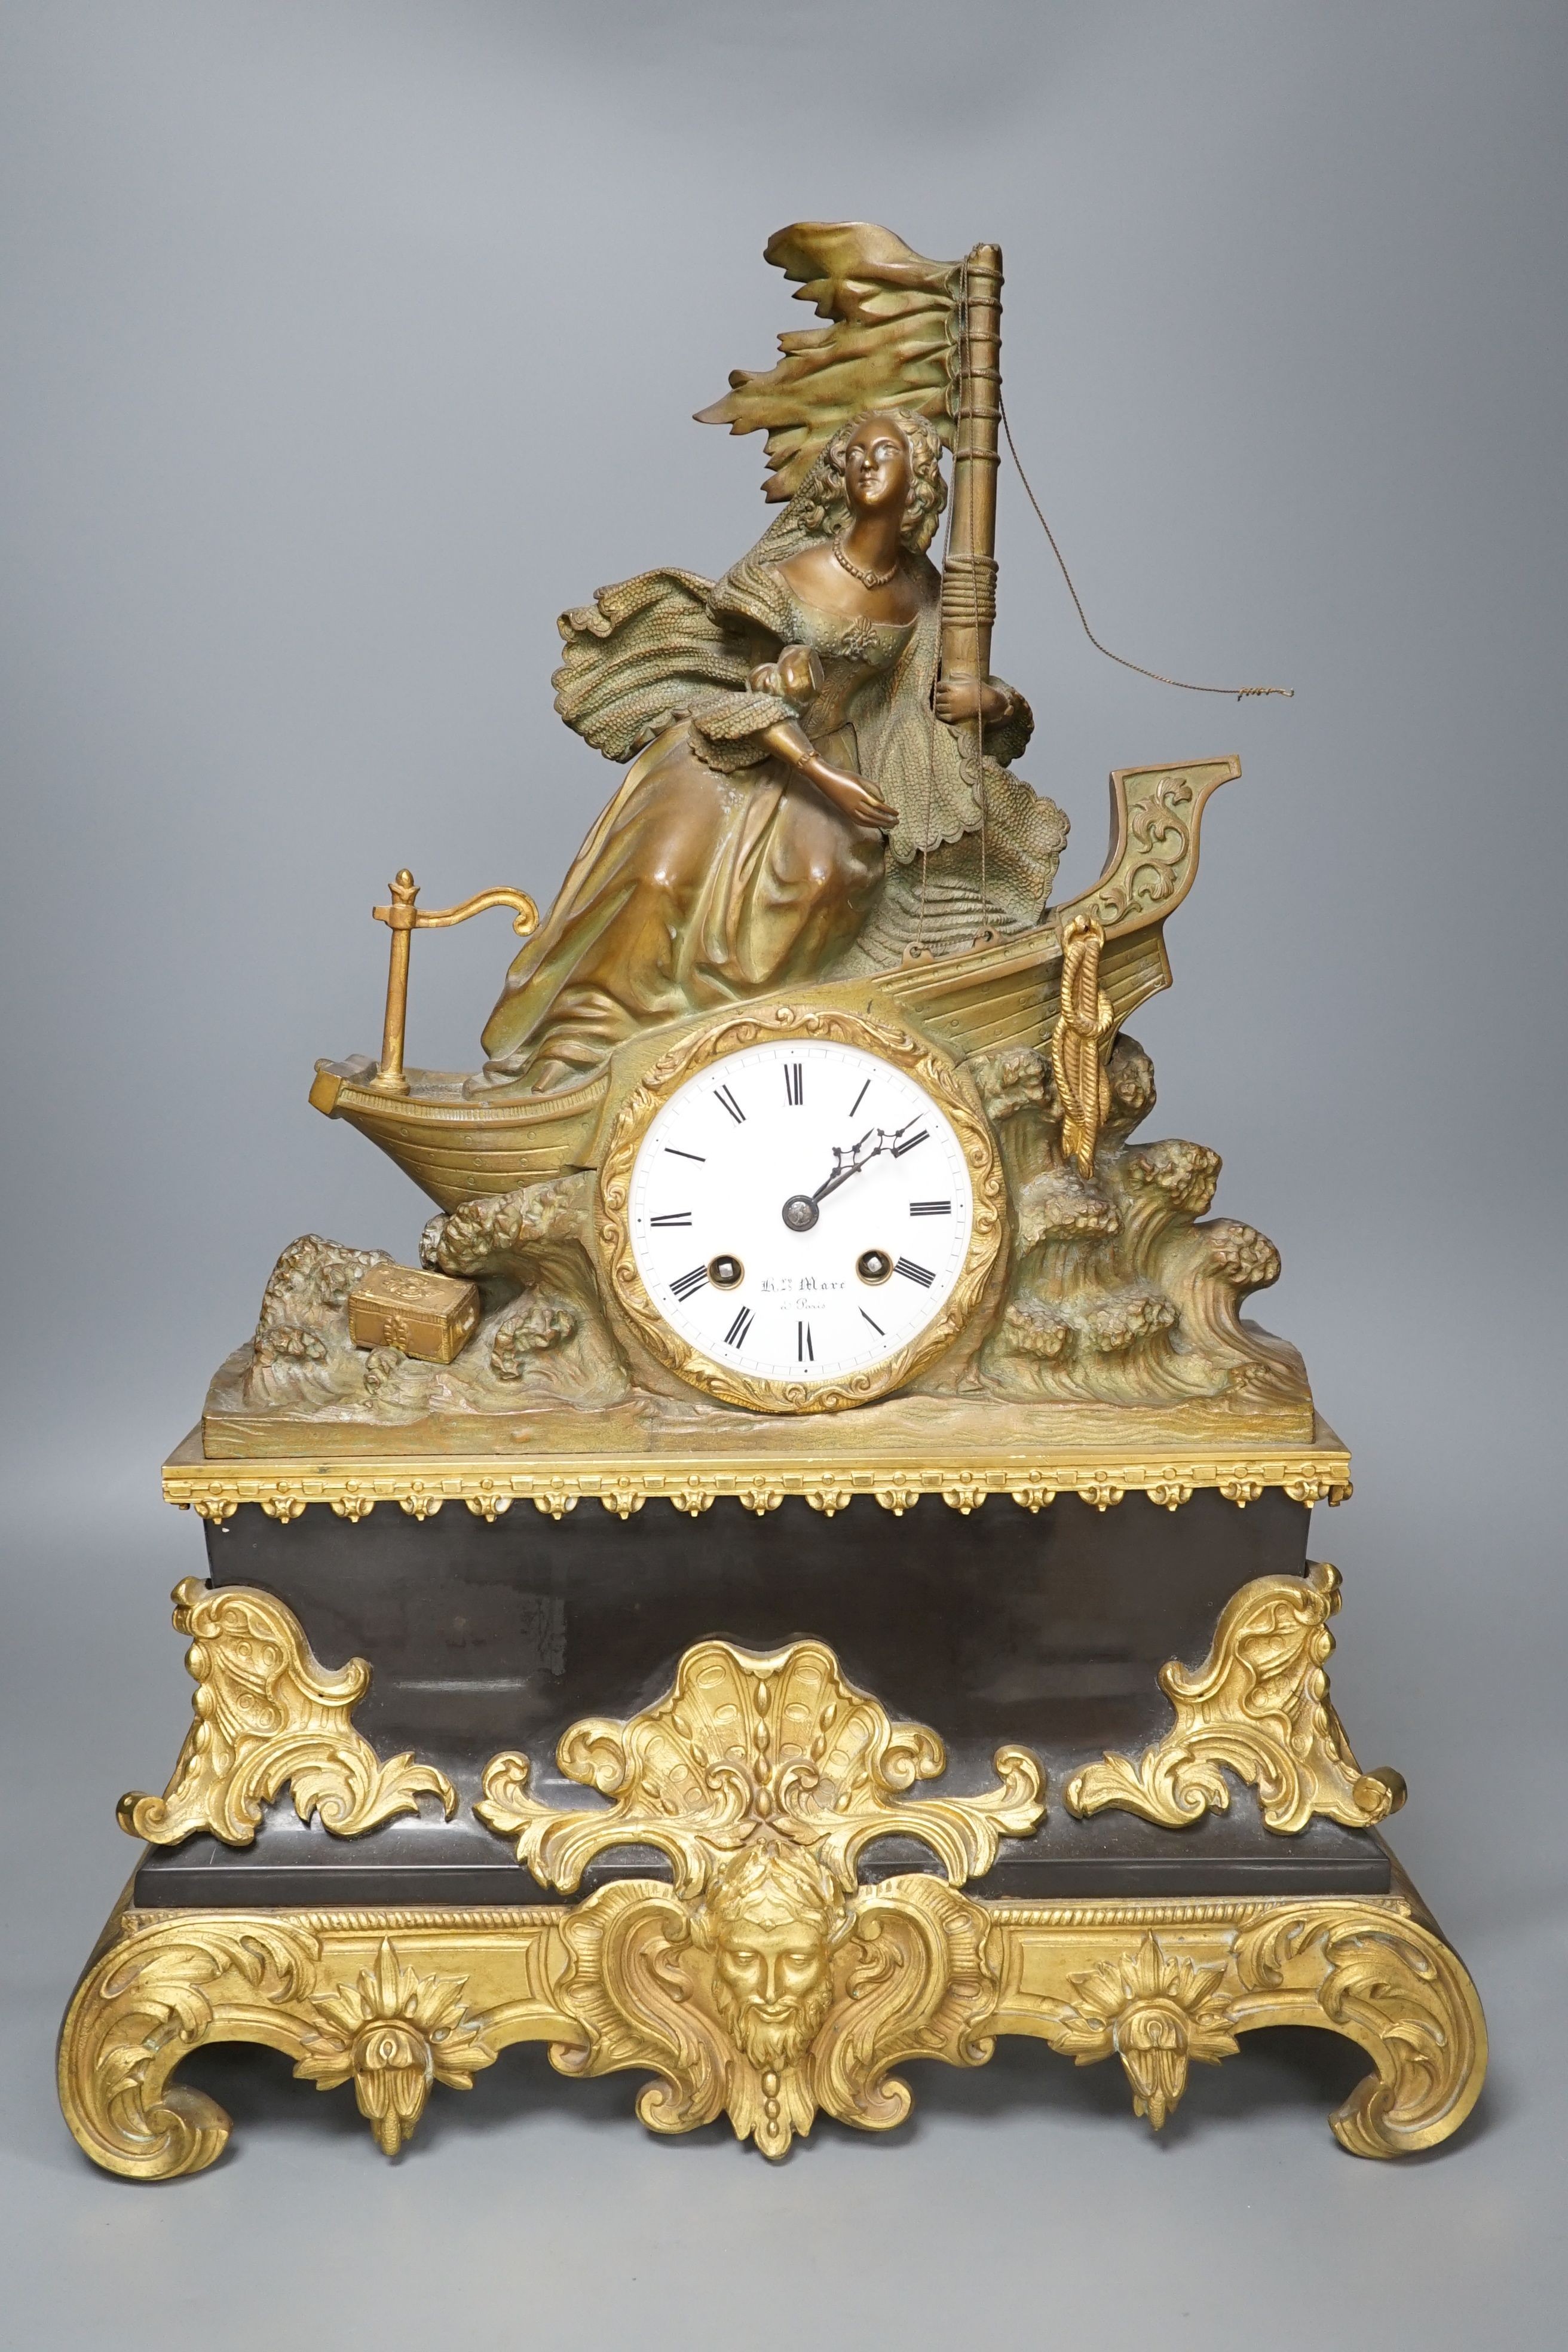 A 19th century French bronze and ormolu mounted black marble mantel clock, 48cms high.